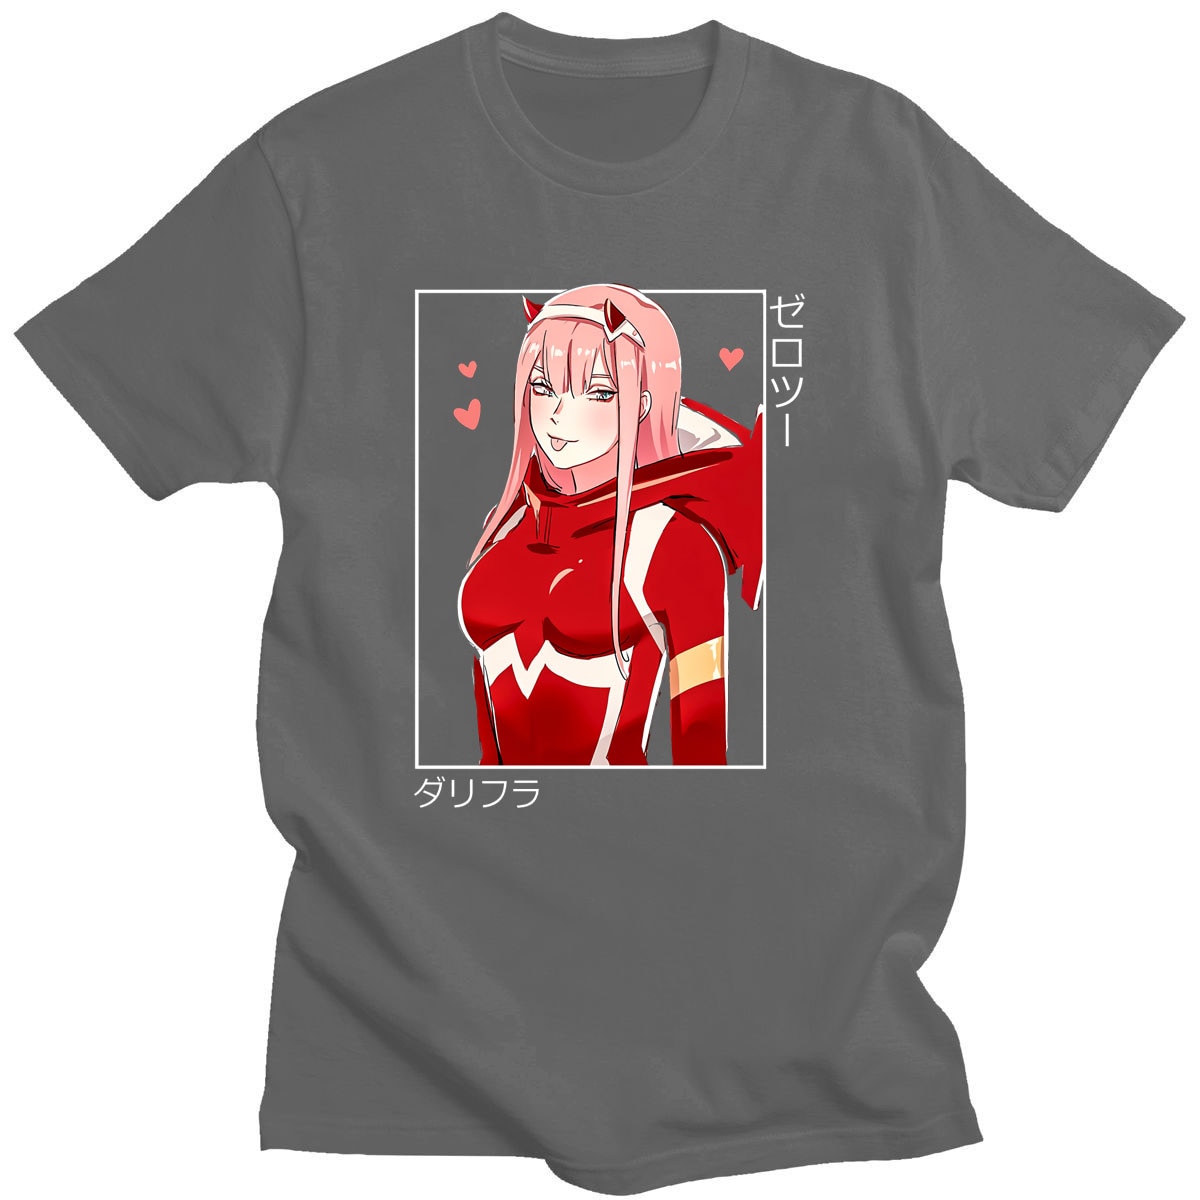 Darling In The Franxx T-shirt - Anime Graphic Print T-shirts